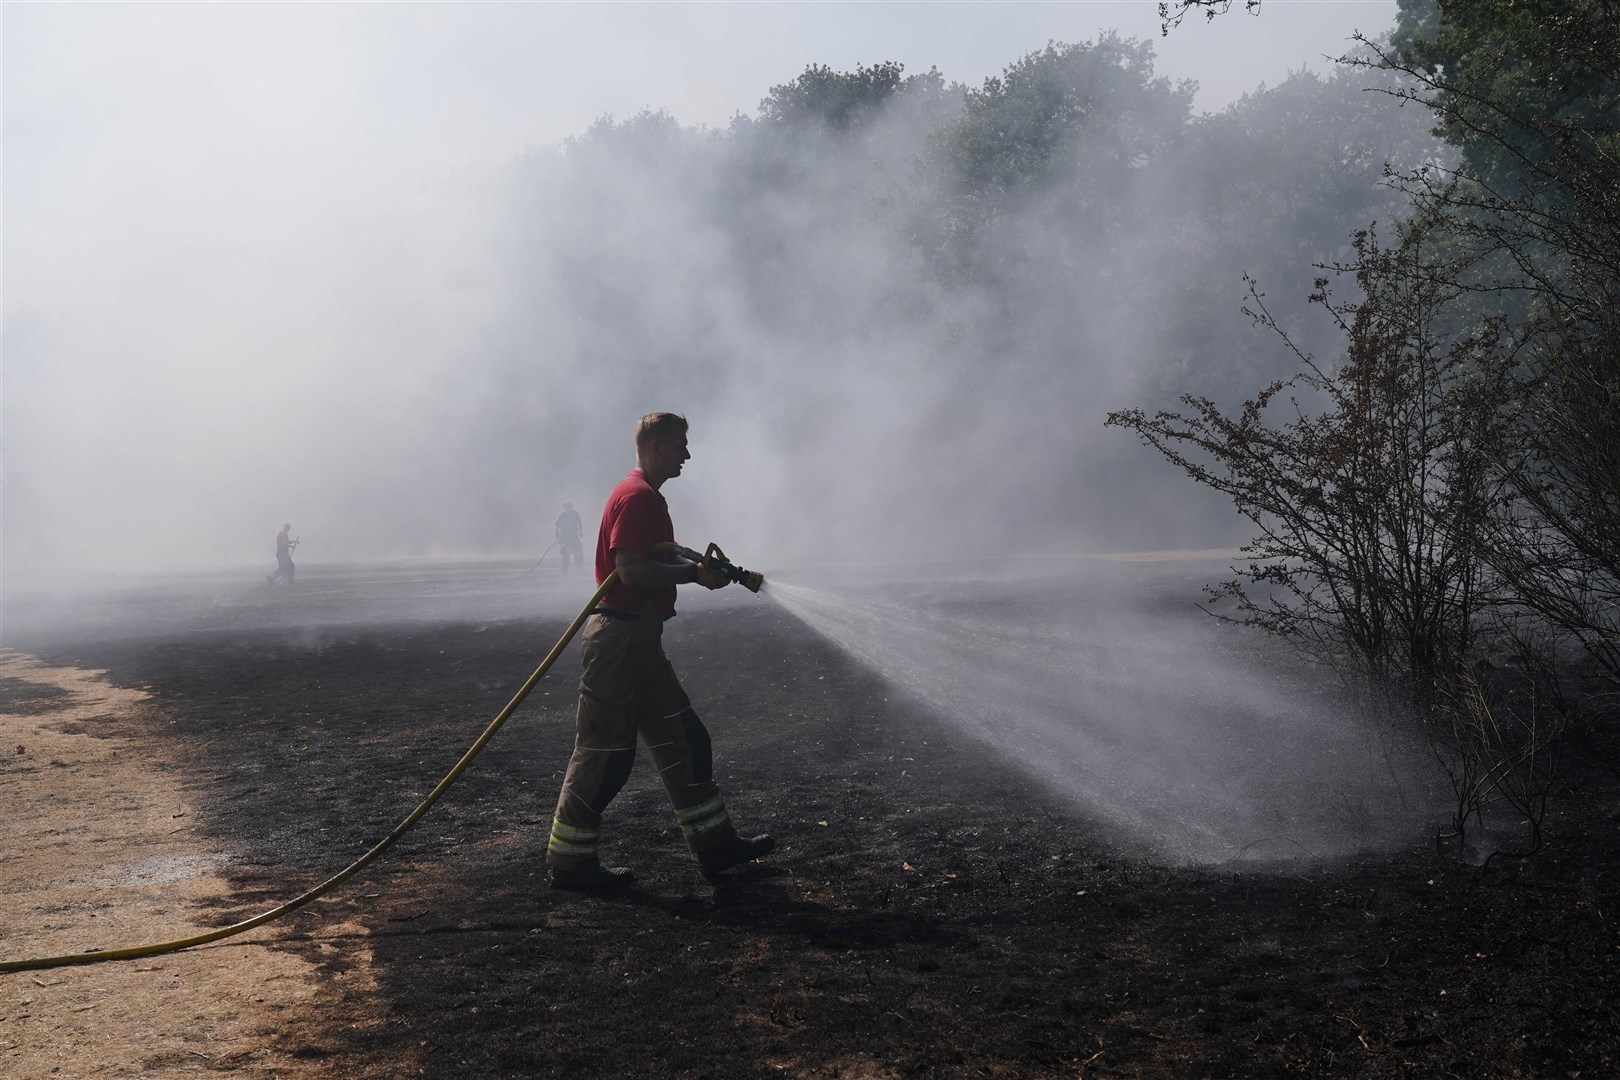 A firefighter dampens down a grass fire at Leyton Flats in east London (Yui Mok).